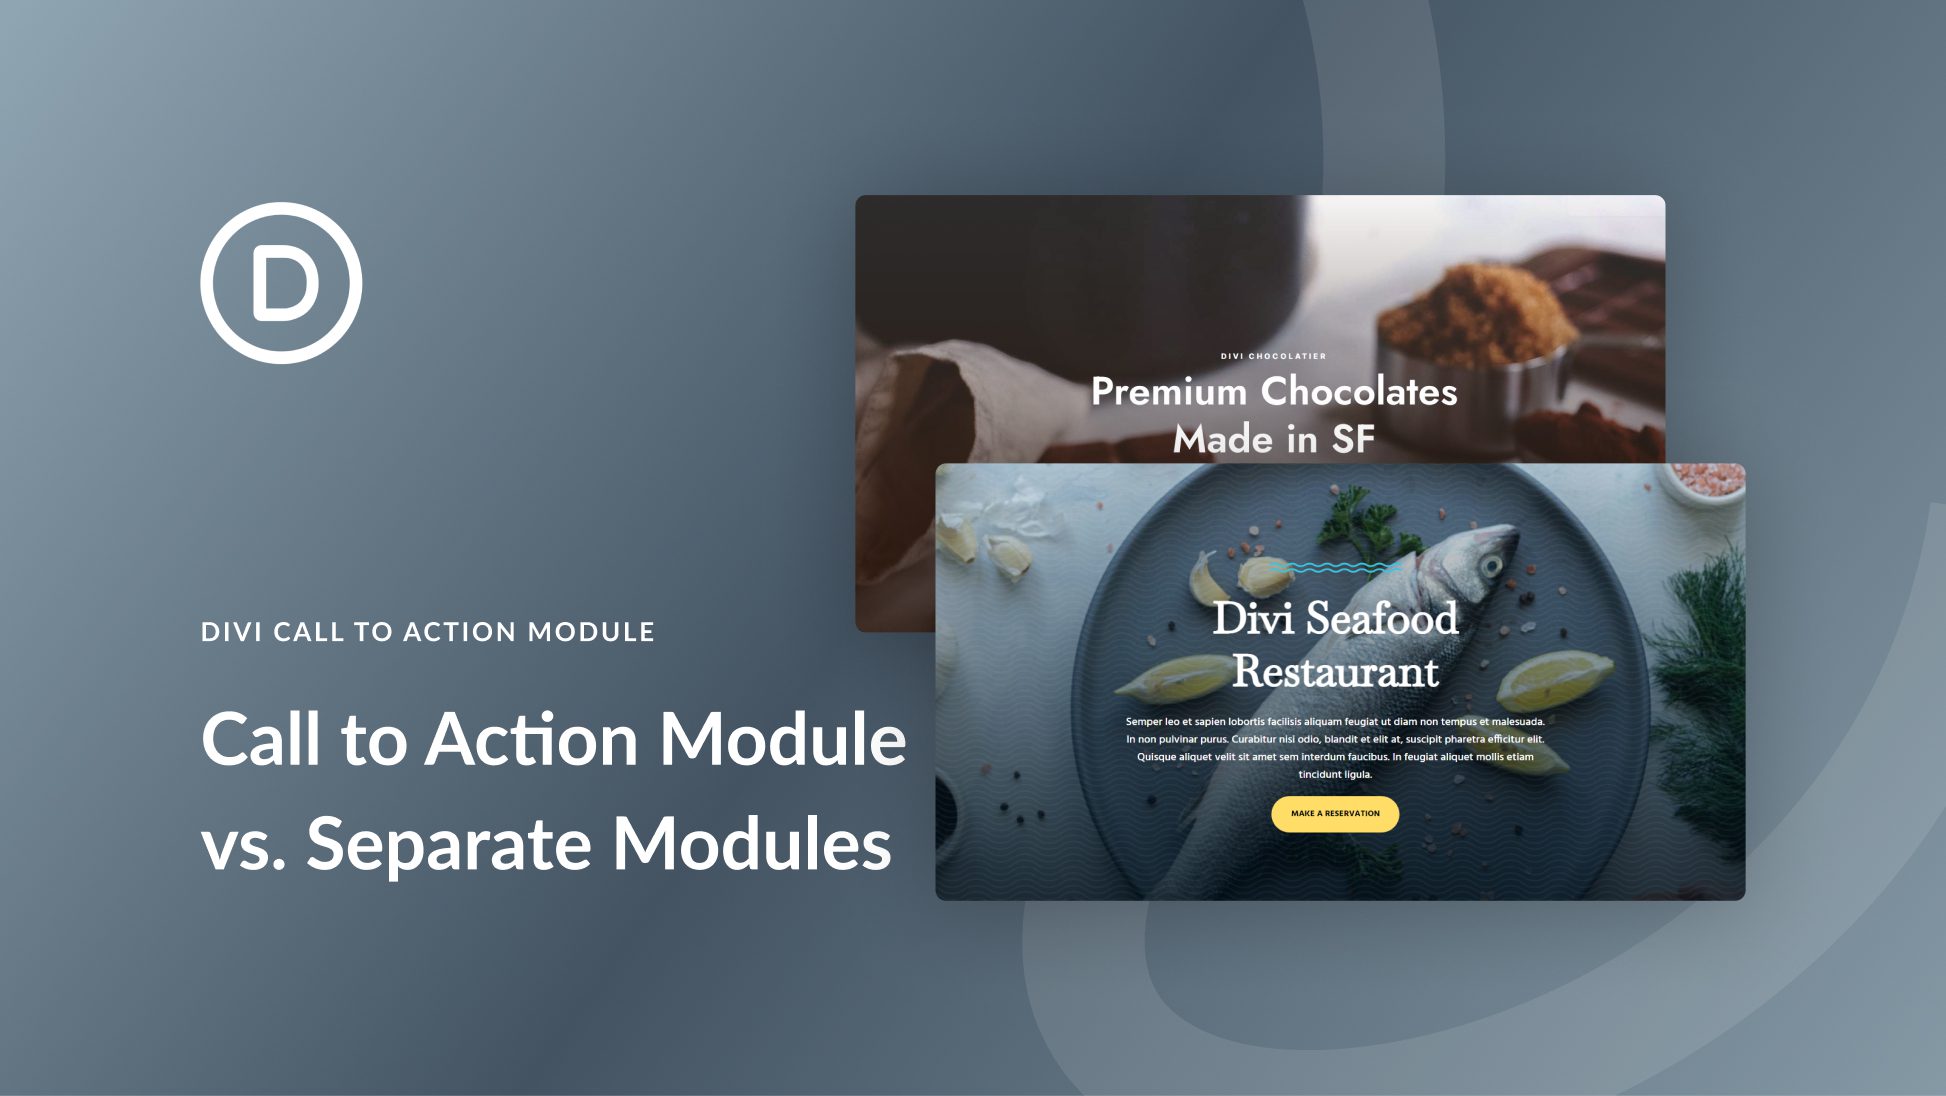 Using the Divi Call to Action Module vs Separate Modules